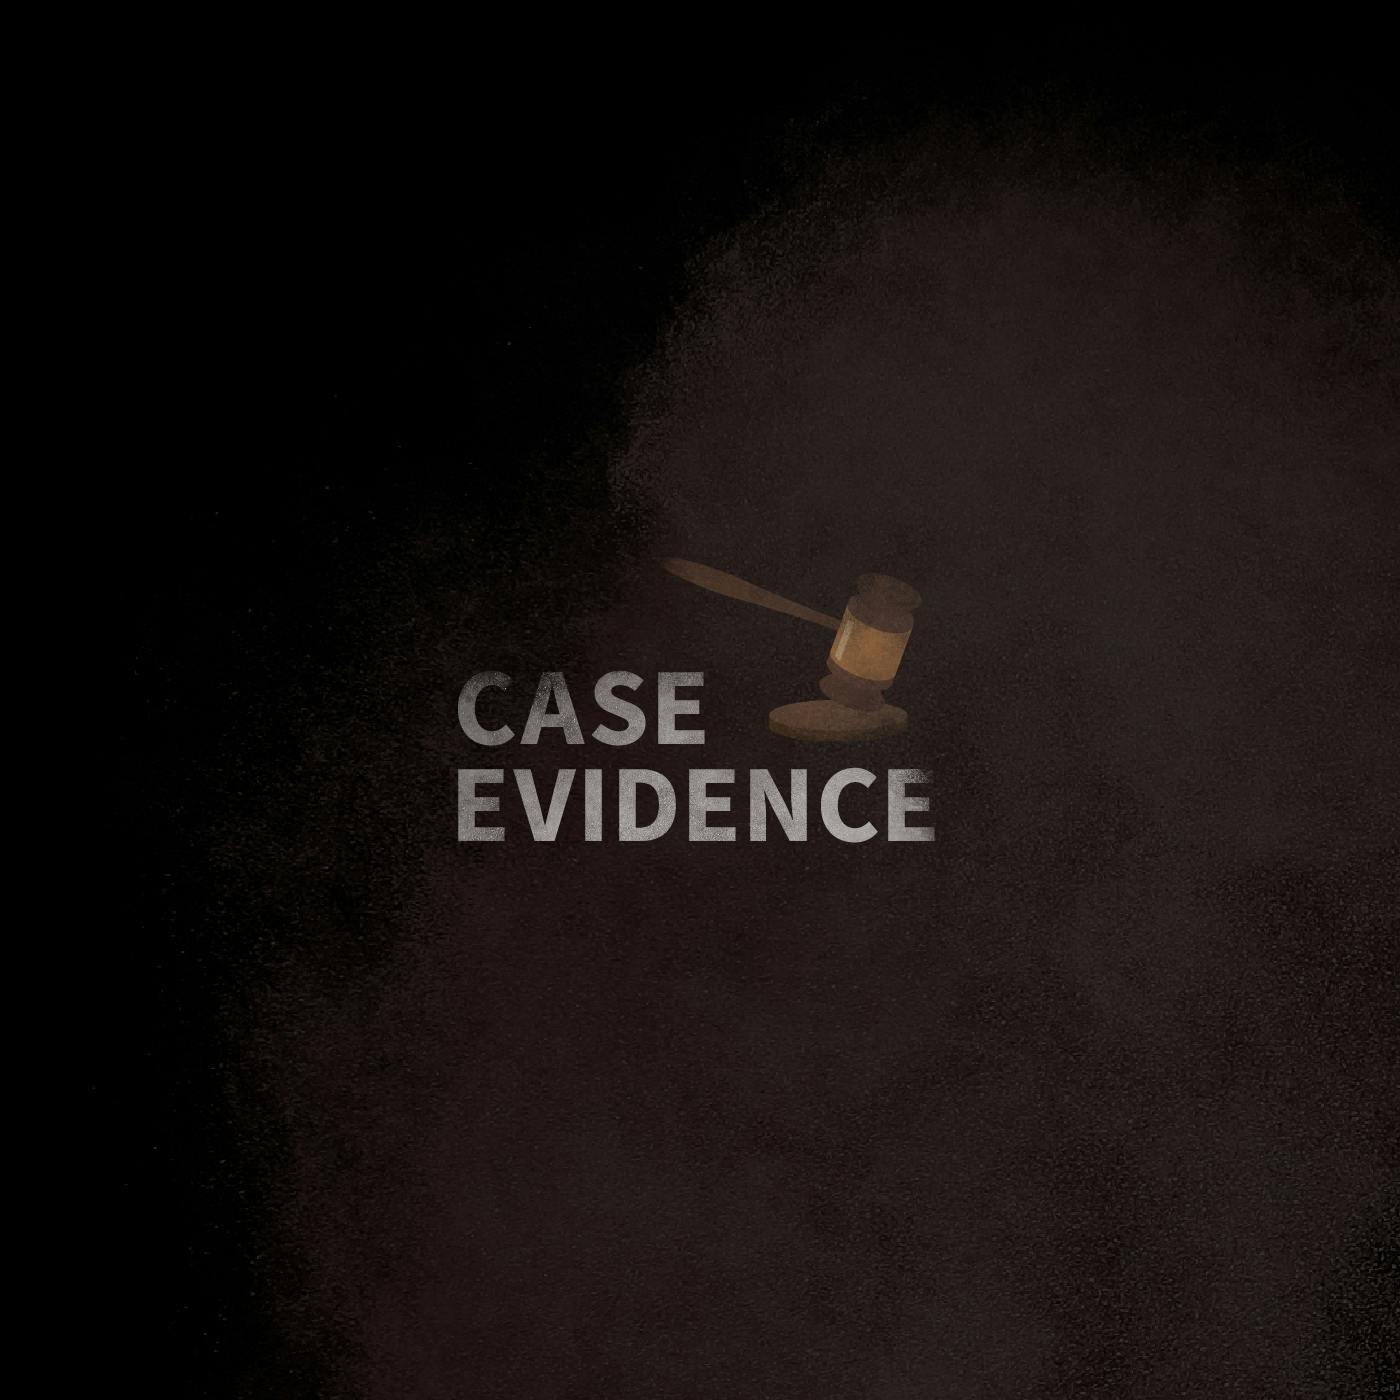 Case Evidence 02.06.17 by Tenderfoot TV